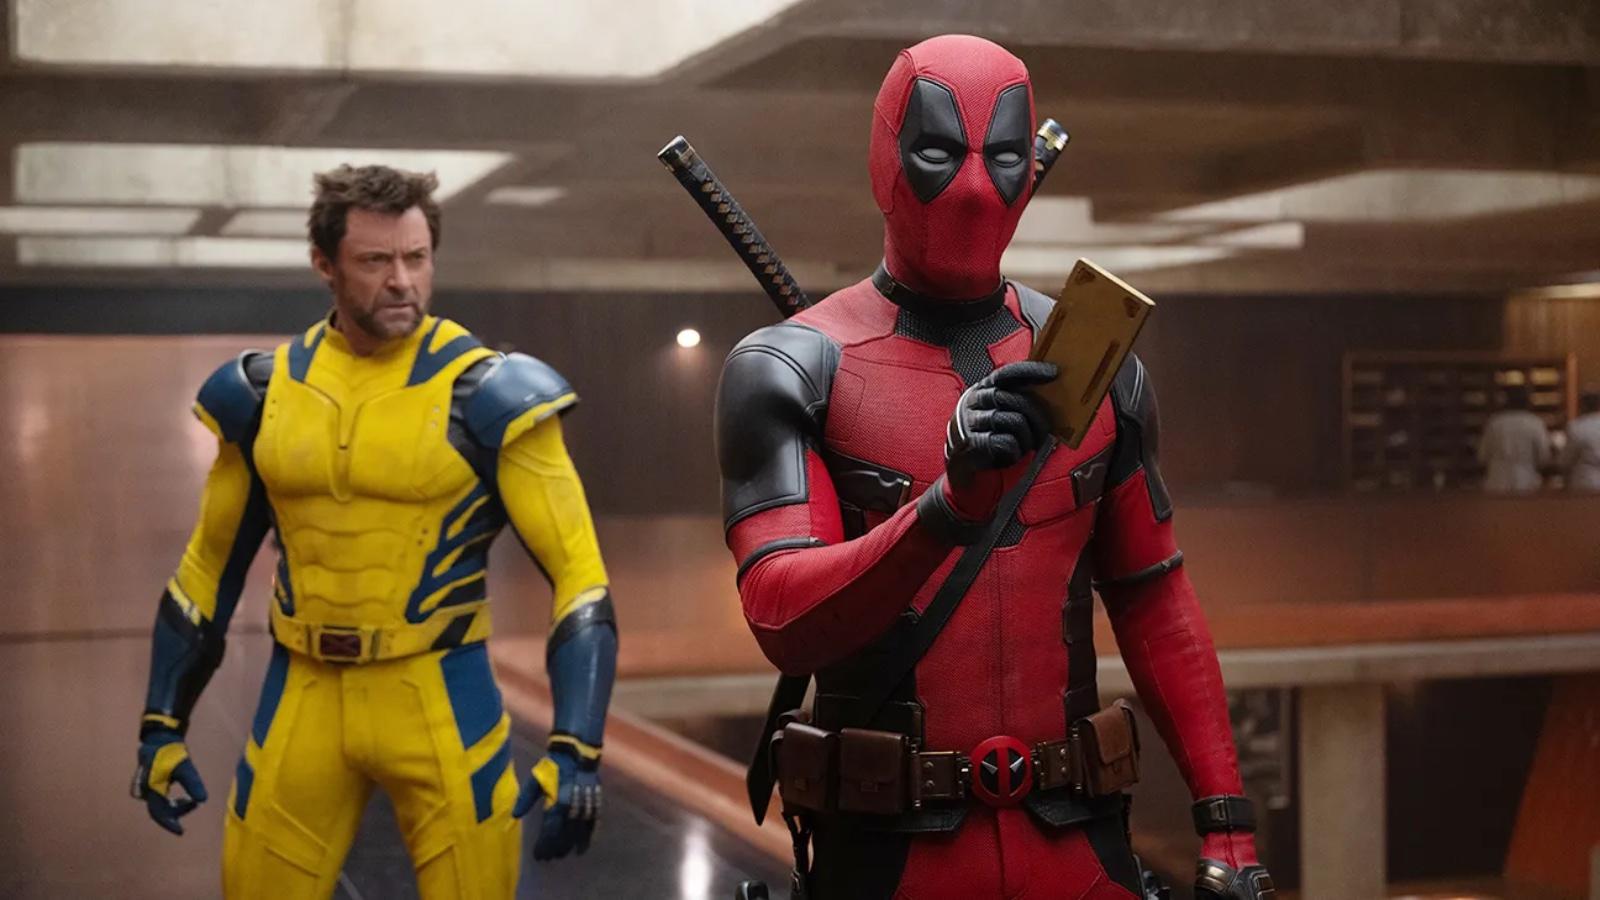 Wolverine and Deadpool at the TVA in Deapool & Wolverine movie